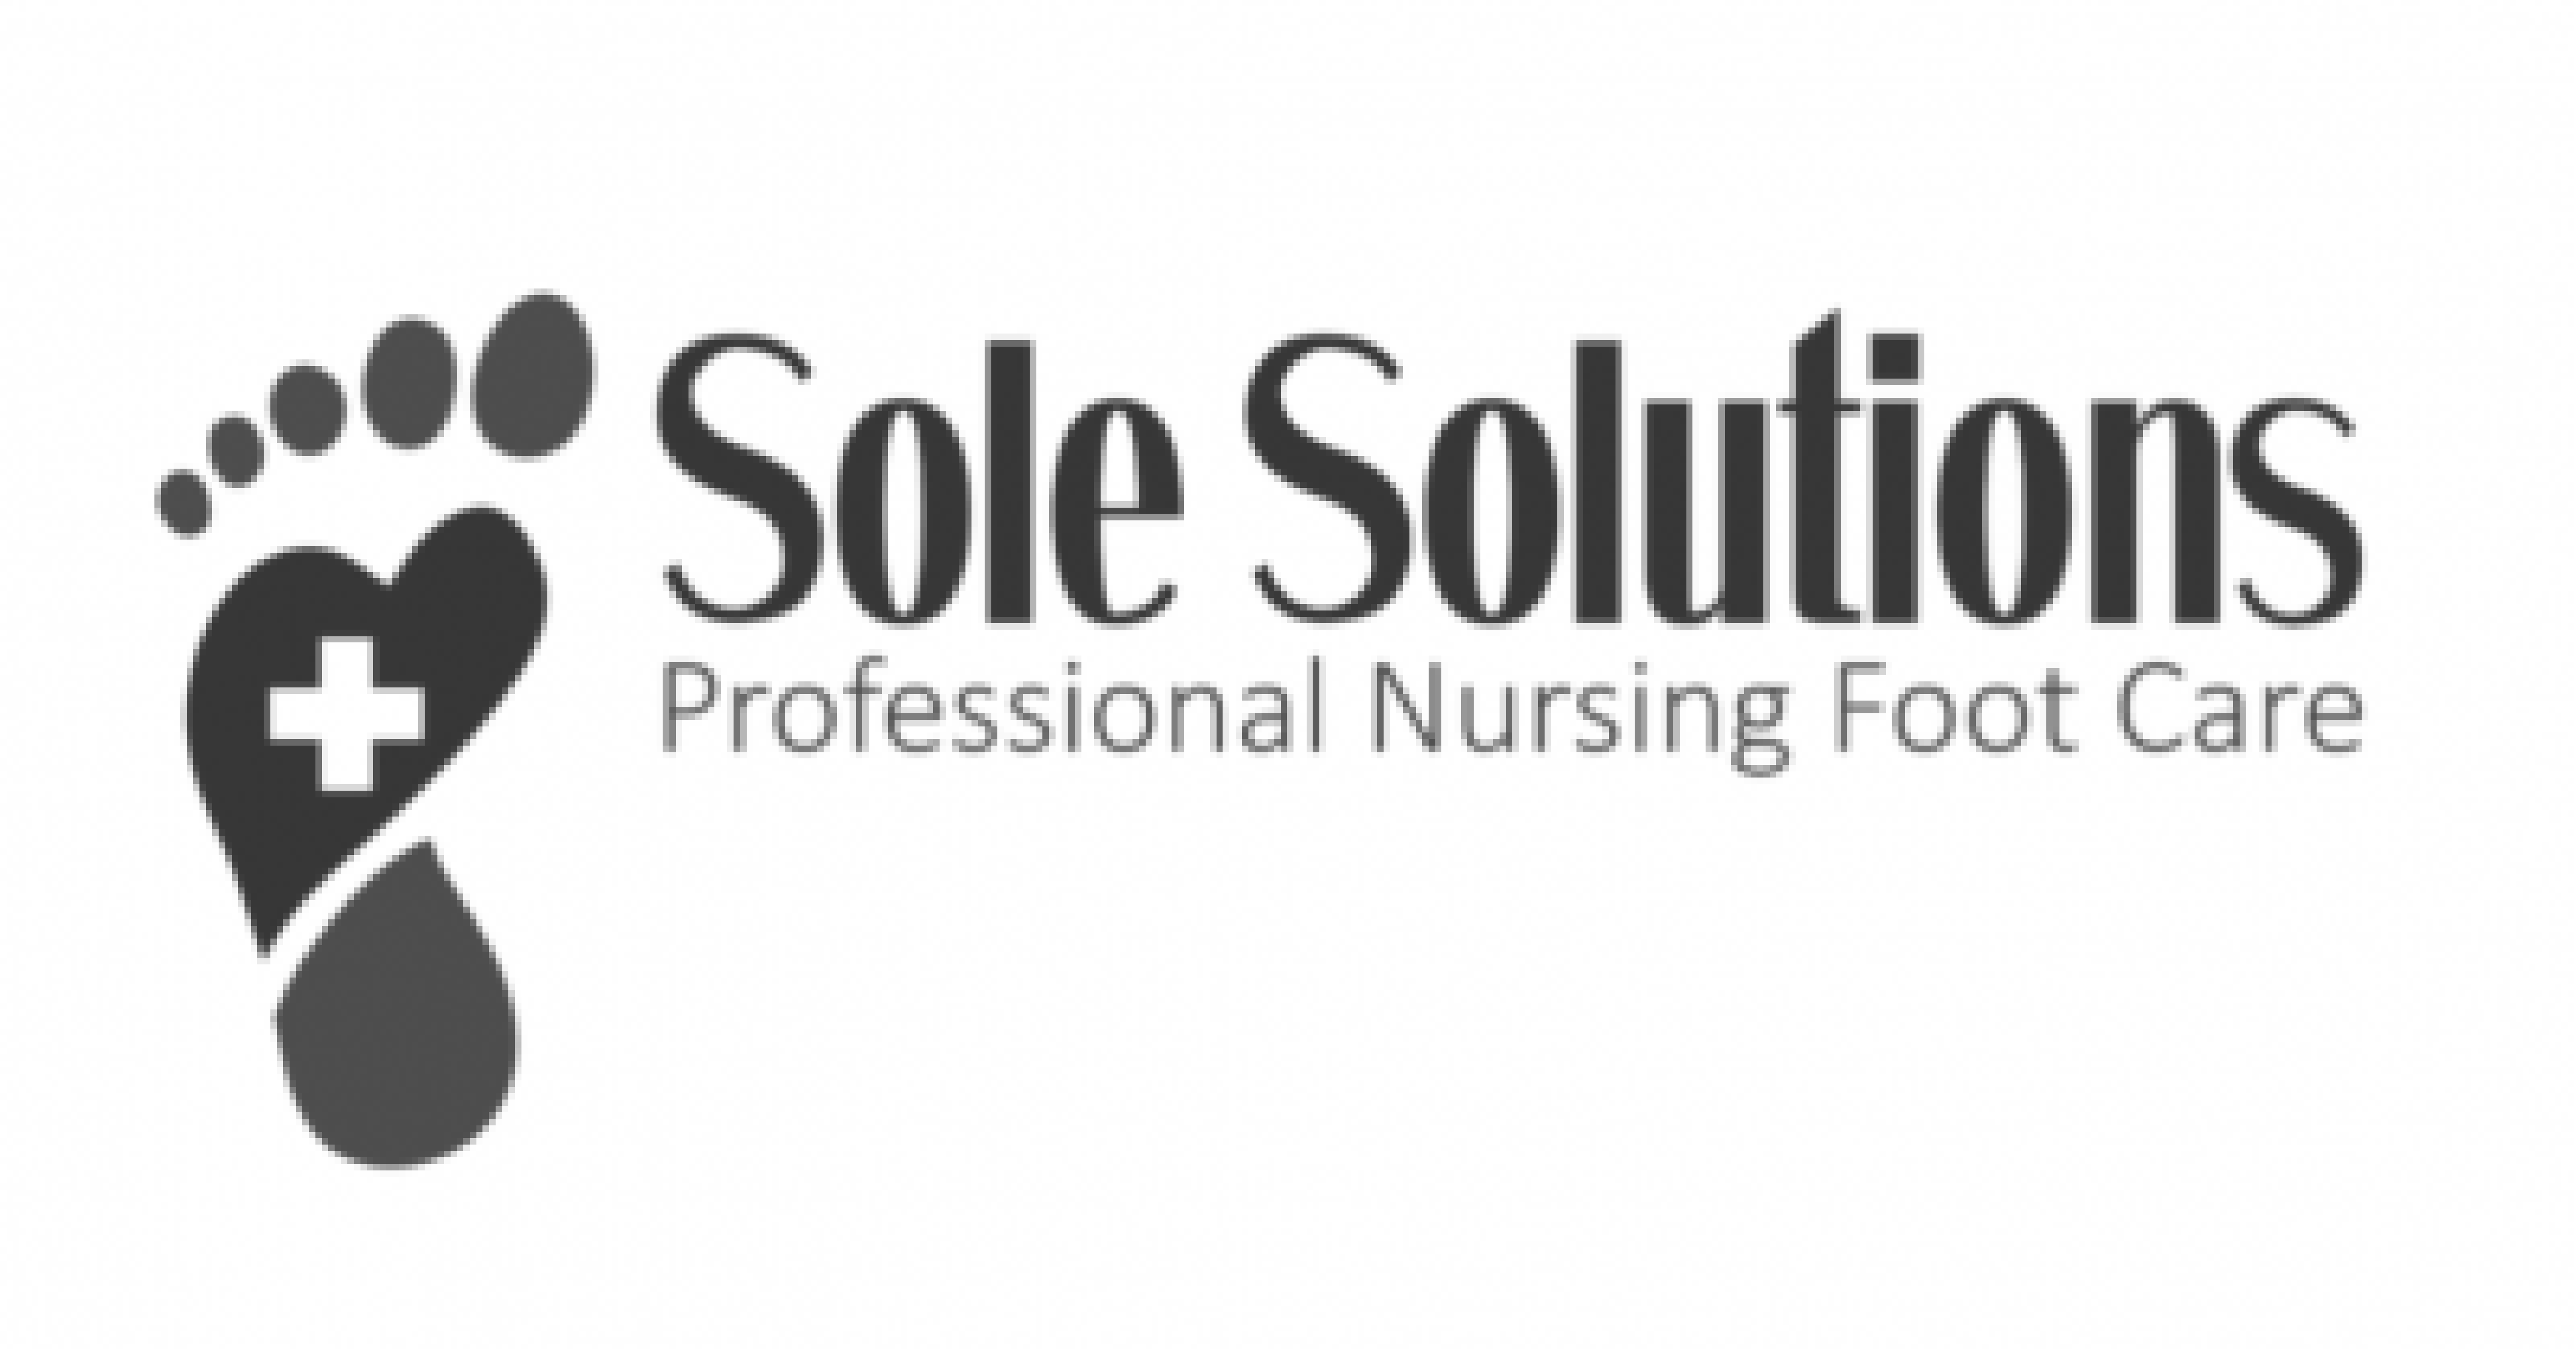 Sole Solutions Professional Nursing Foot Care